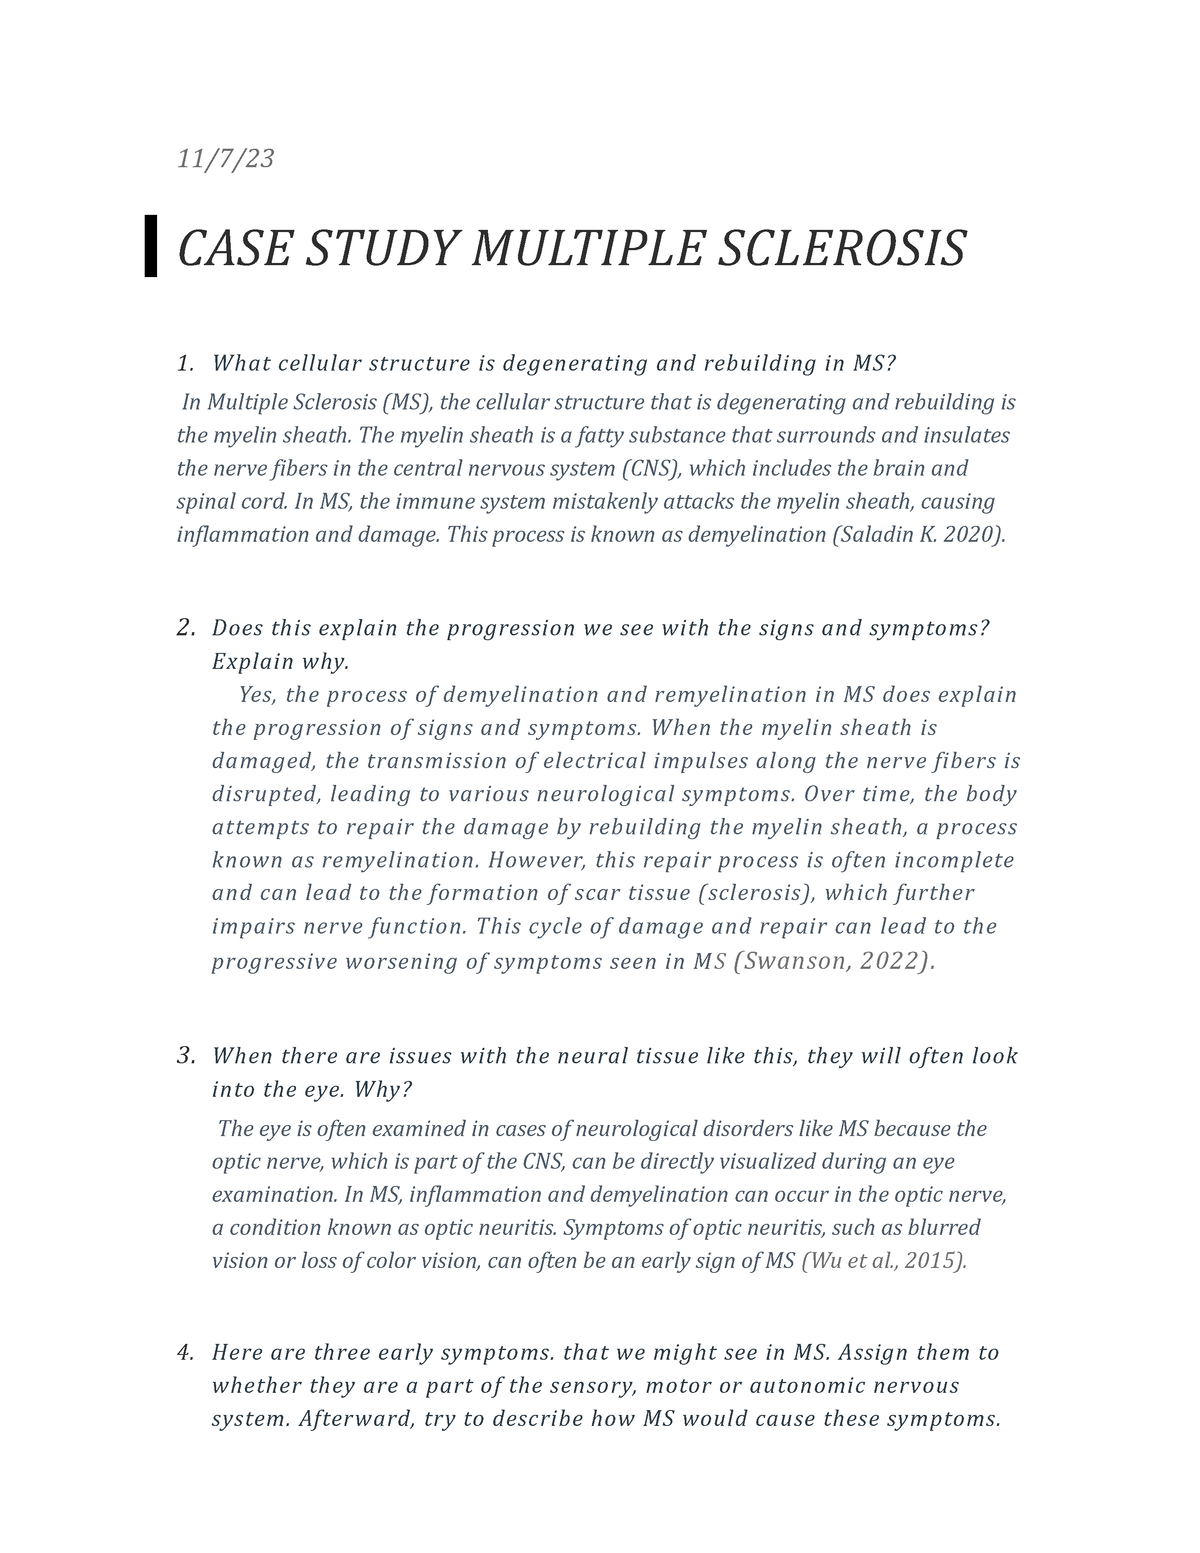 case study patient with multiple sclerosis